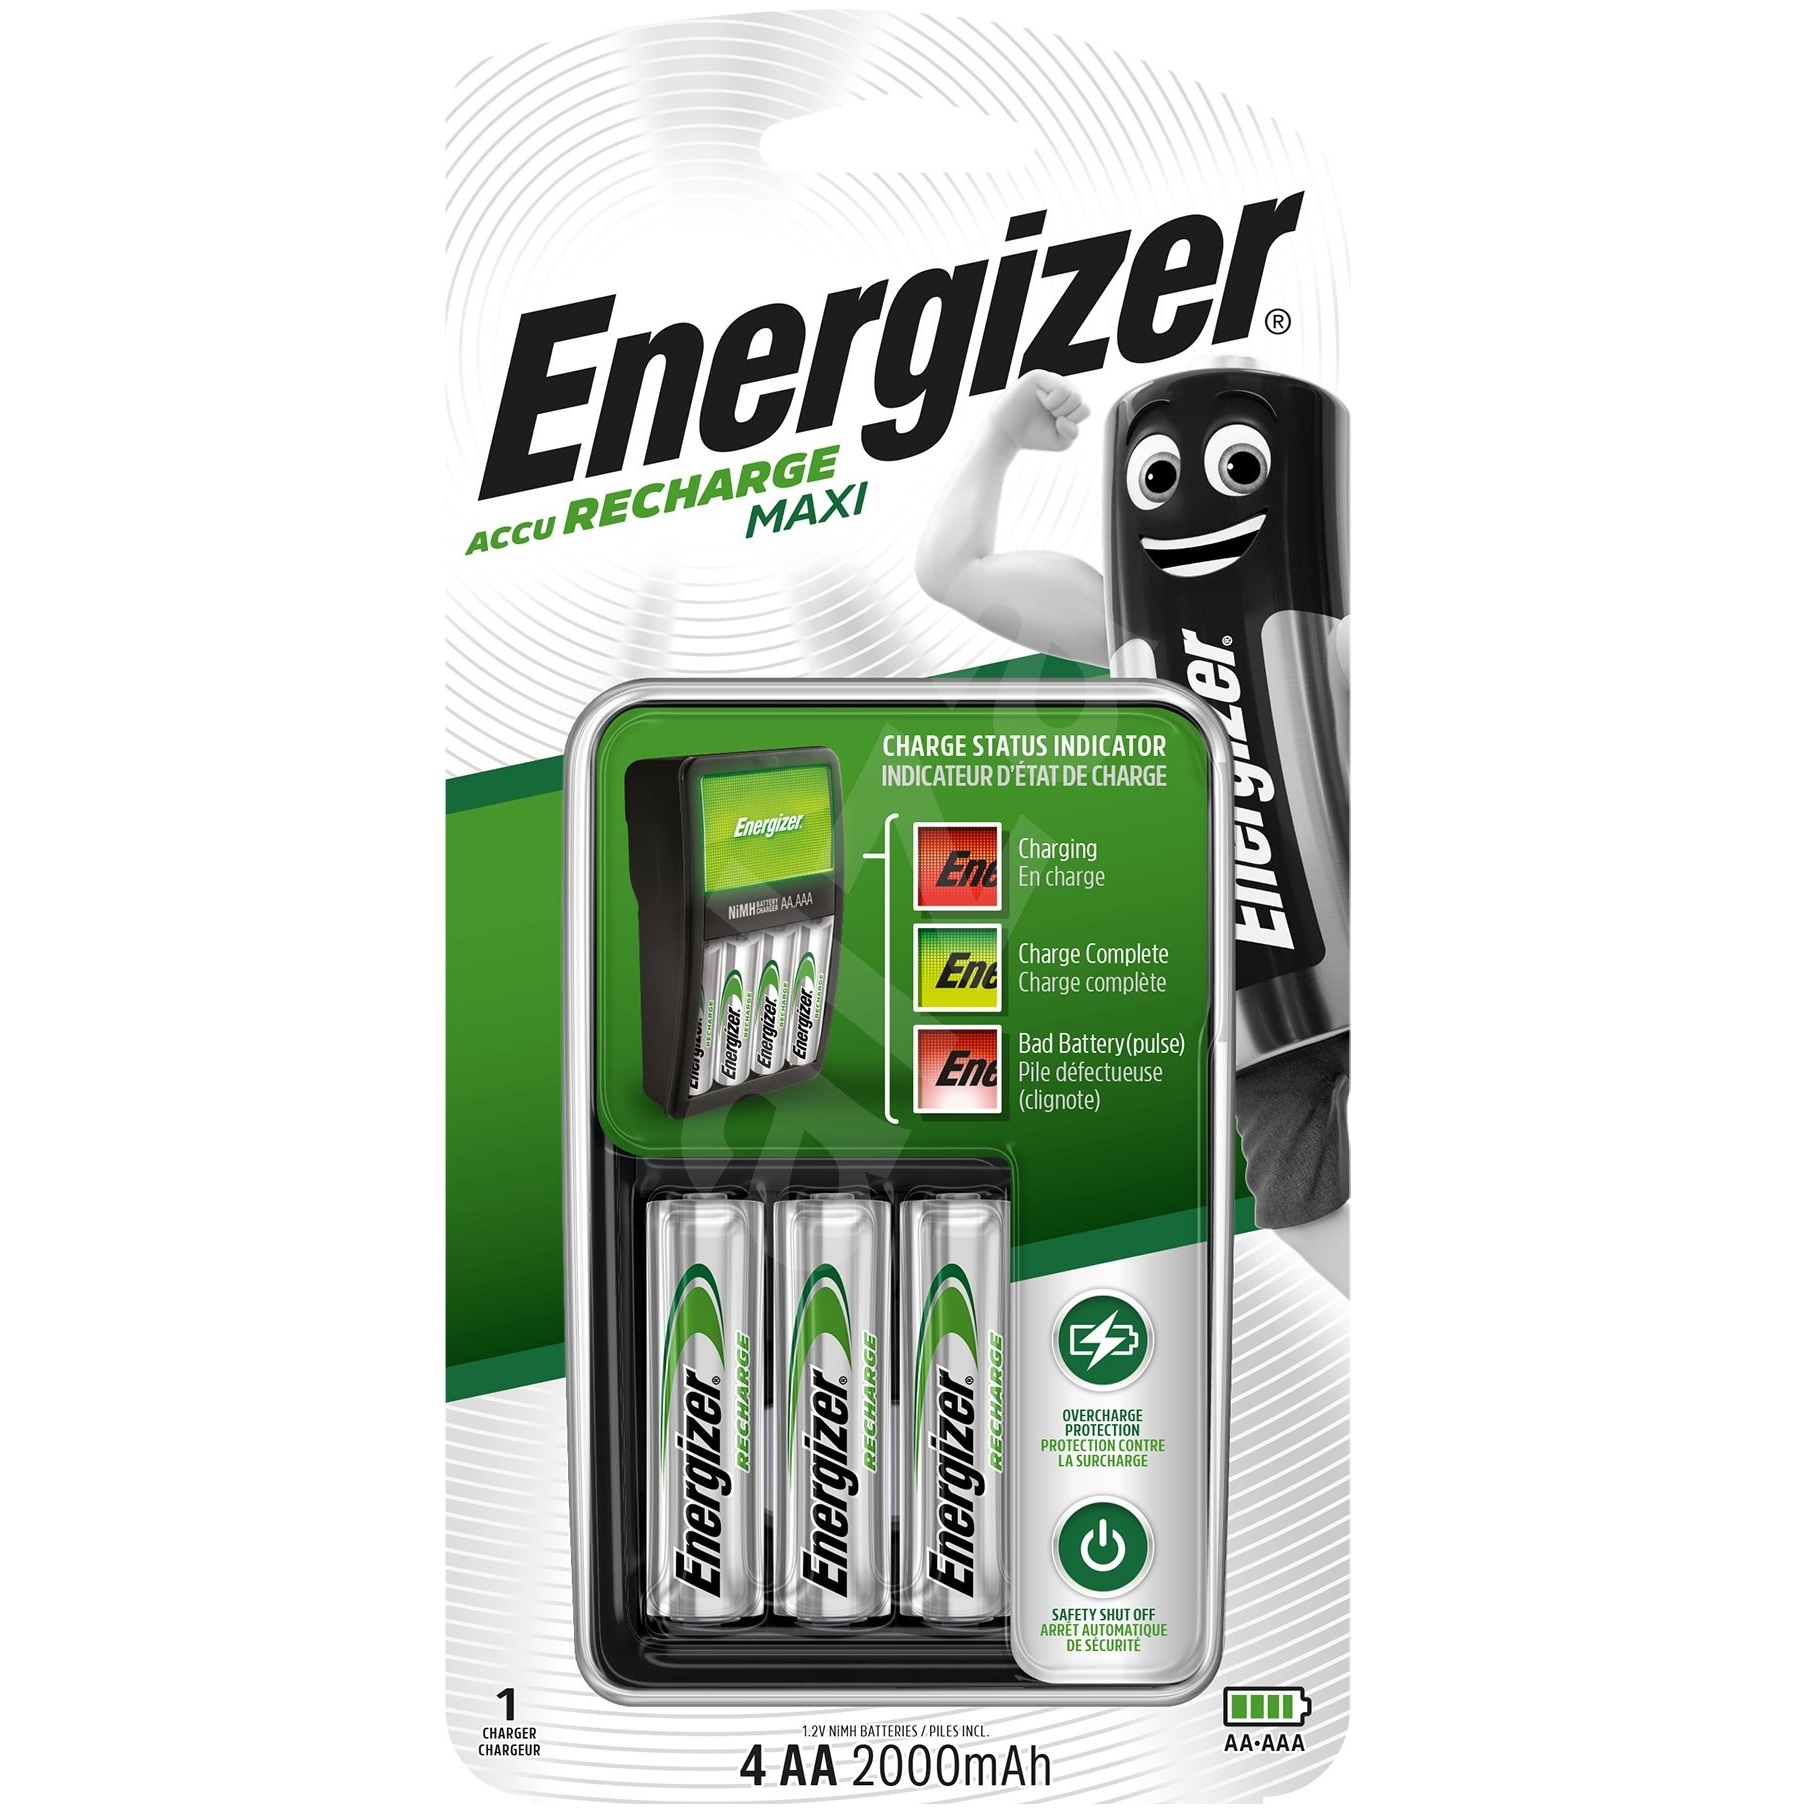 Energizer Battery Charger Recharge MAXI 